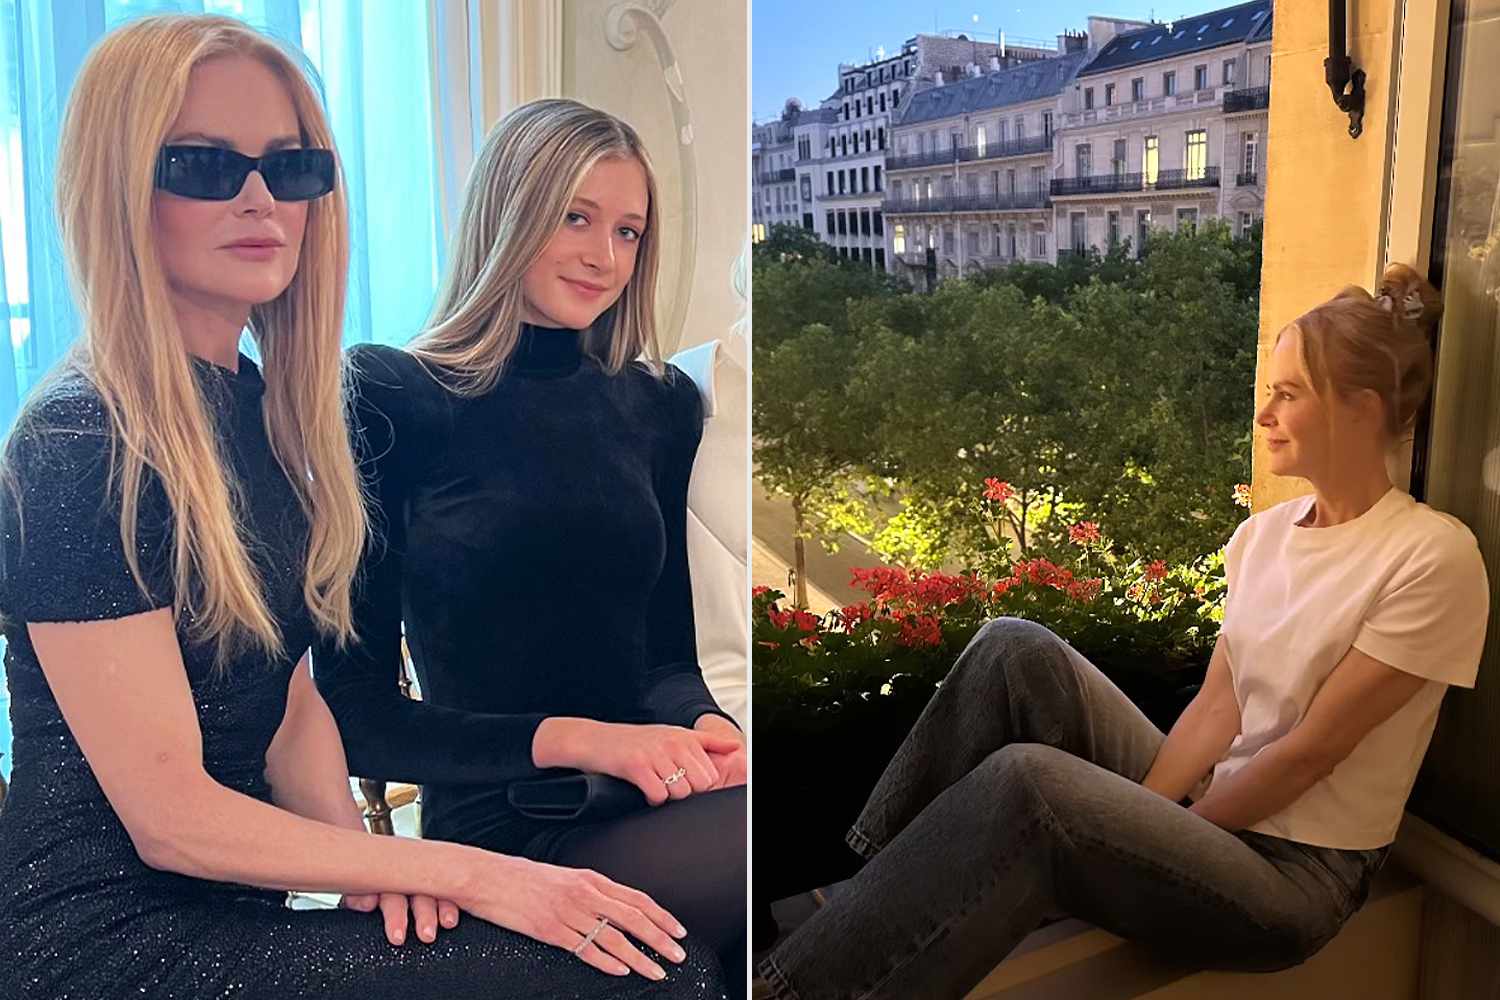 Nicole Kidman Has an Impromptu Photo Shoot in Her Hotel Room During Paris Trip with Daughter Sunday Rose [Video]